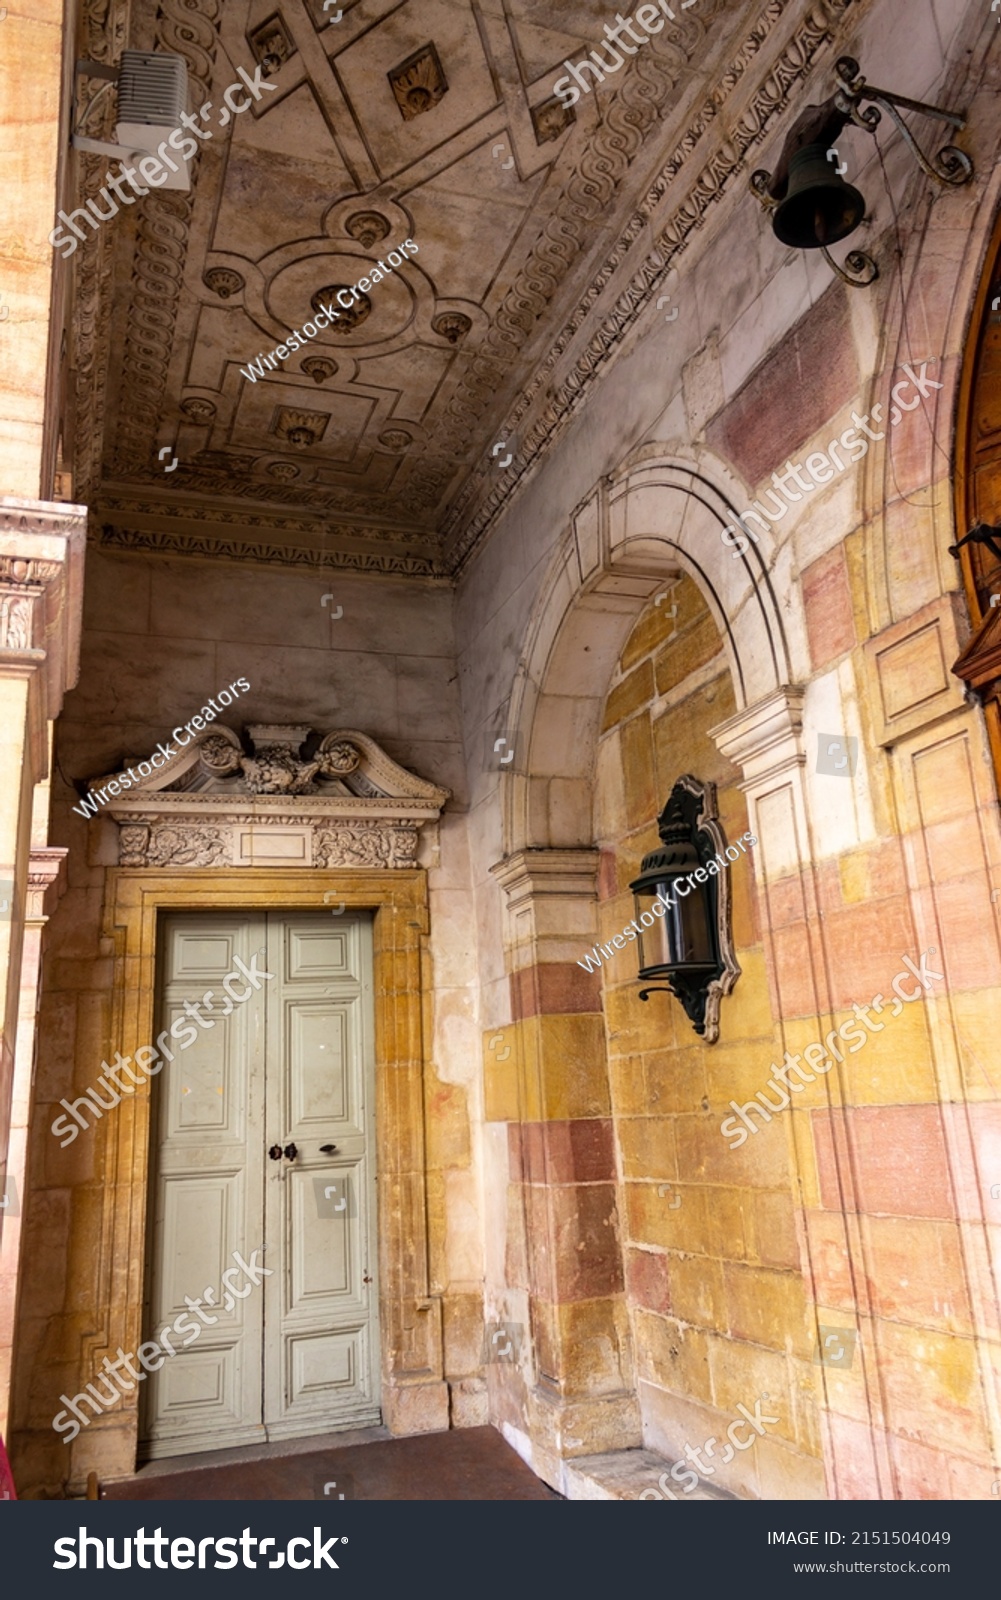 A vertical shot of the hall with adorned walls and a door  Dijon, France  #2151504049